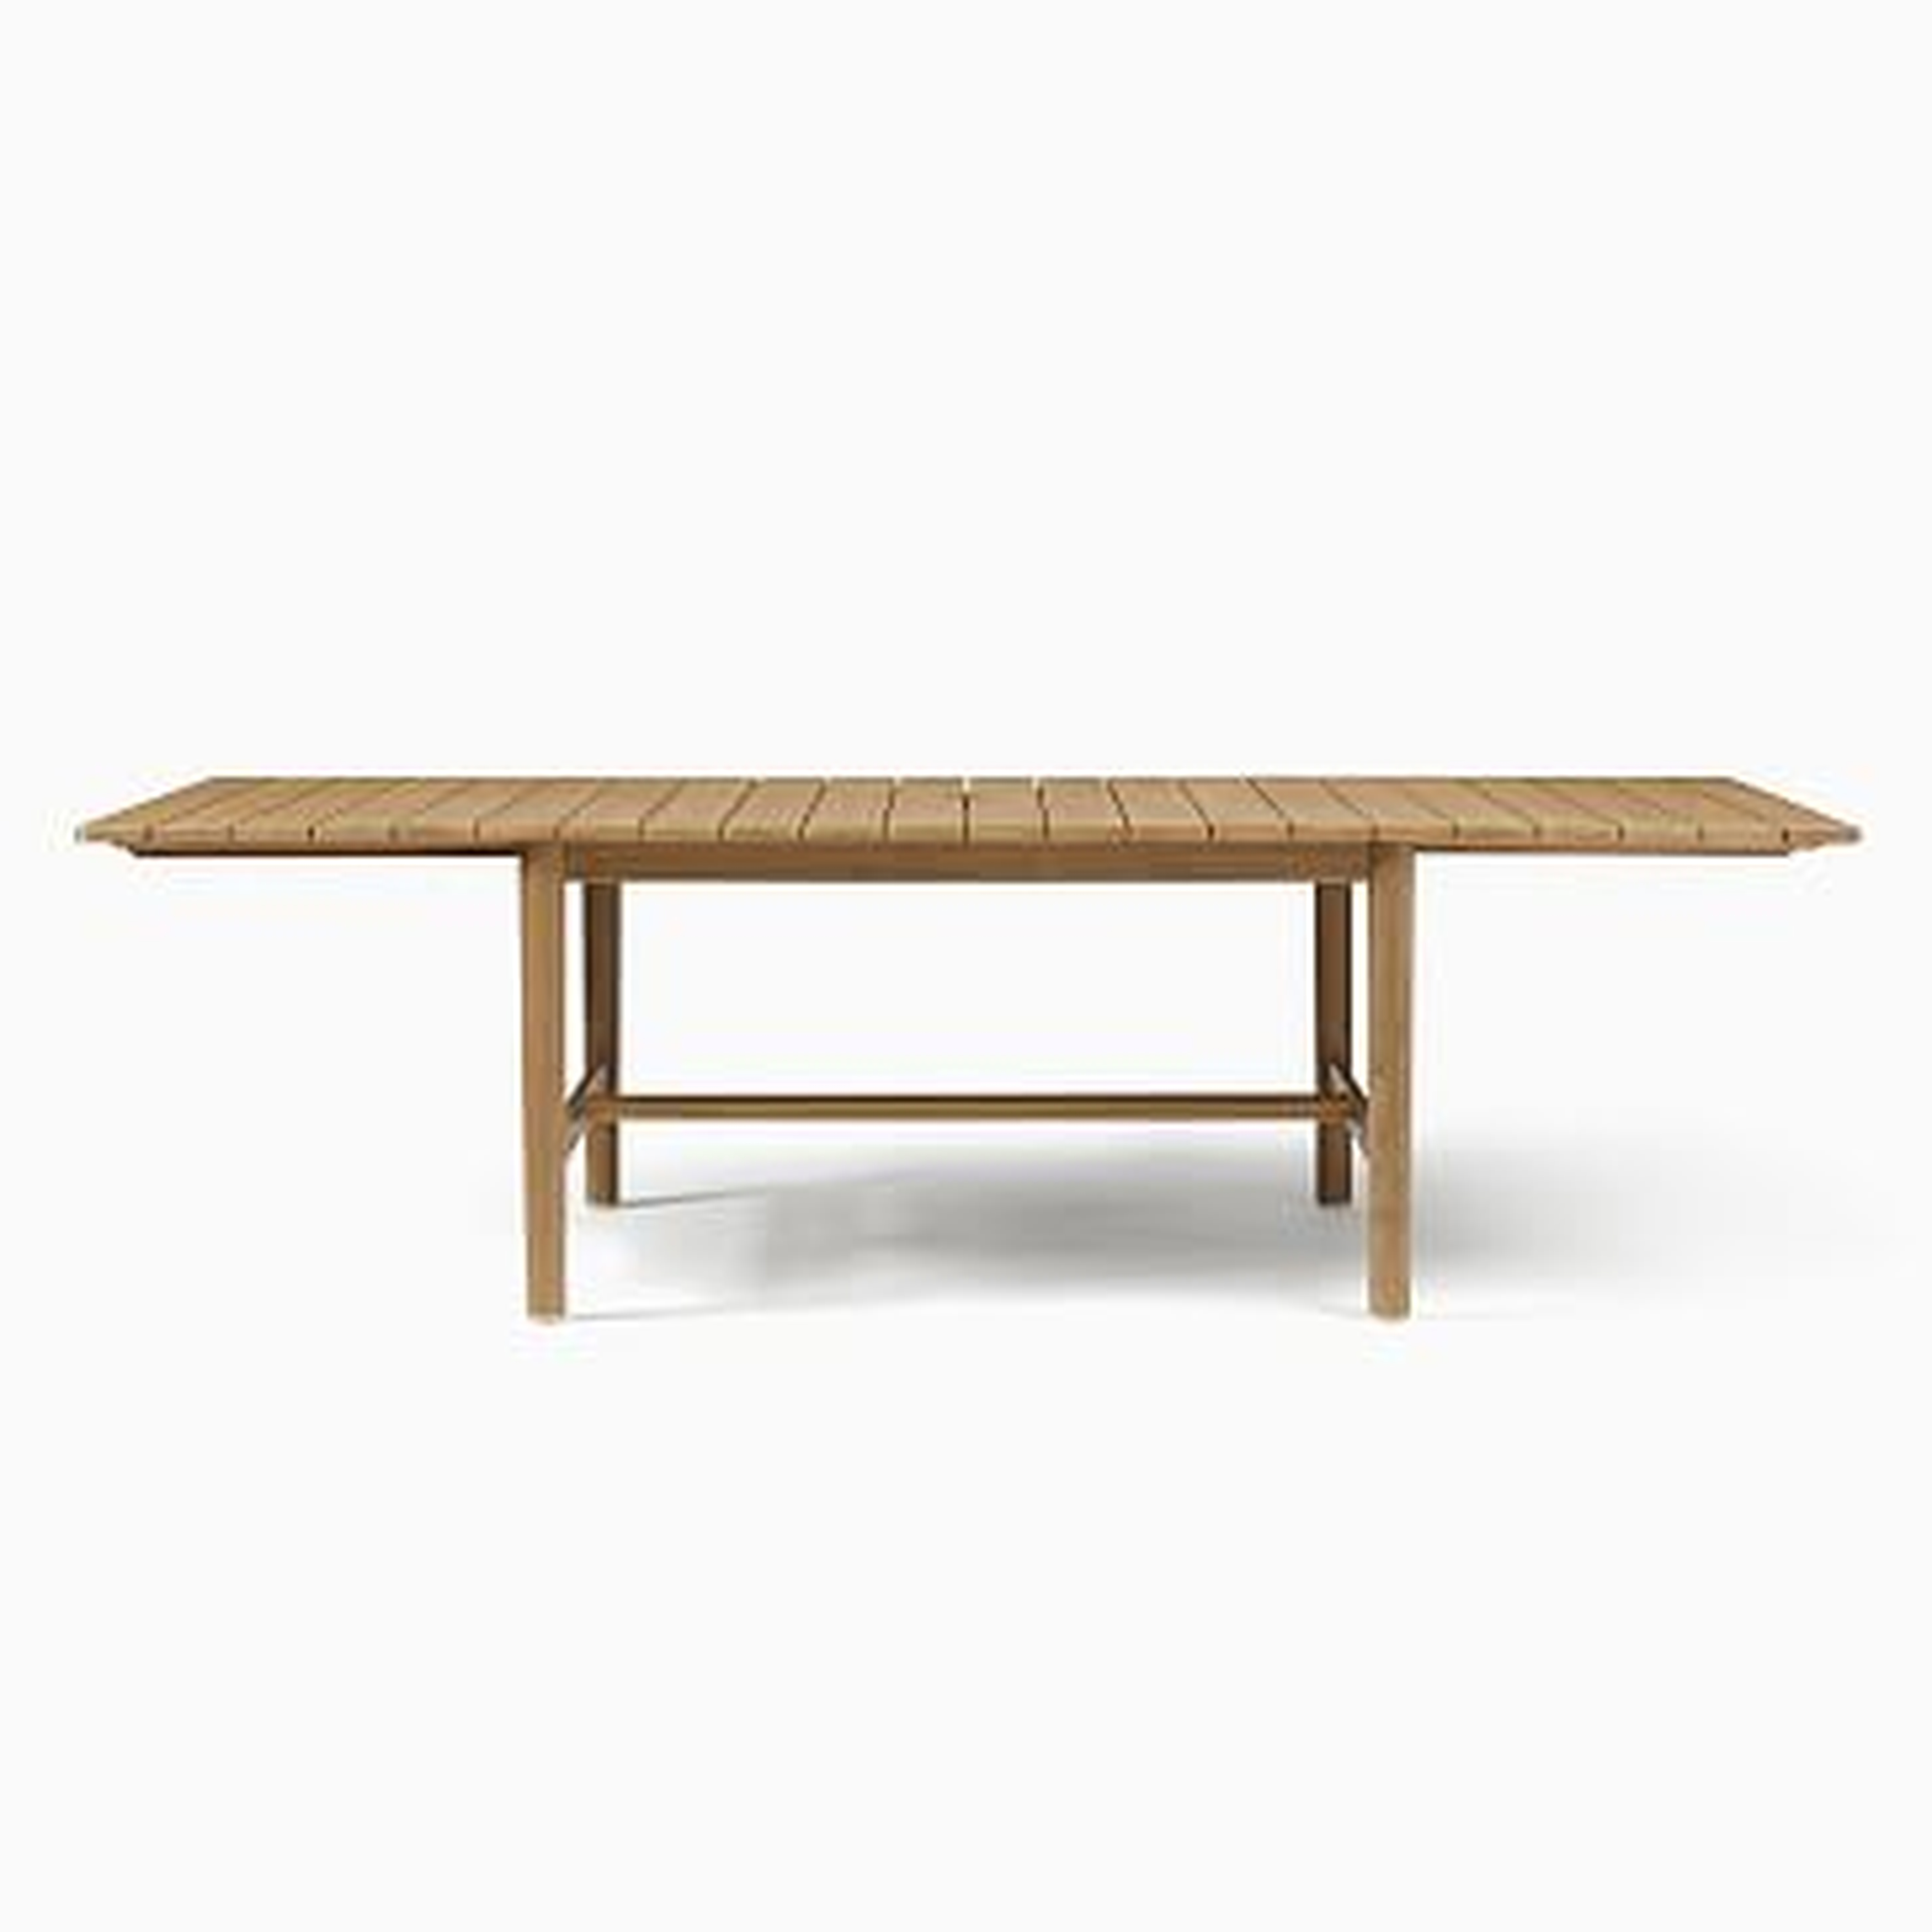 Hargrove Outdoor 76.5 in - 106 in Rectangle Expandable Dining Table, Reef - West Elm